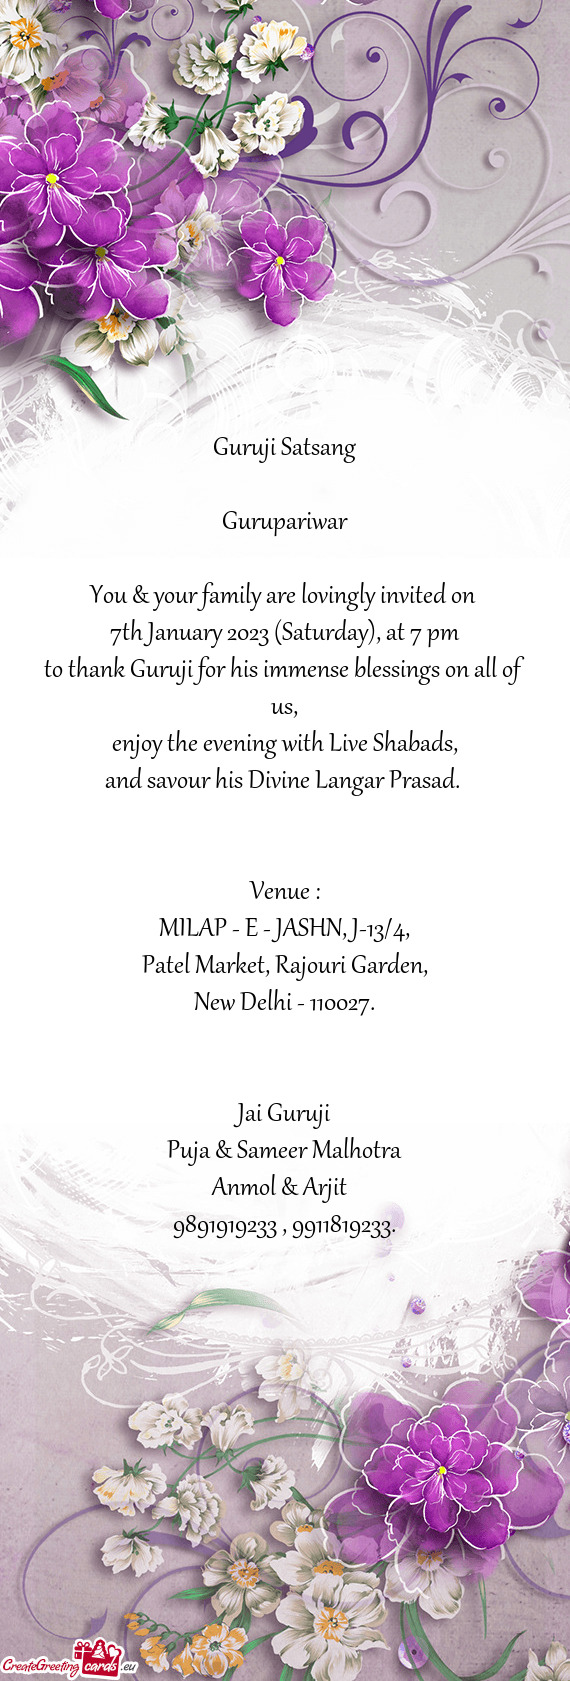 You & your family are lovingly invited on